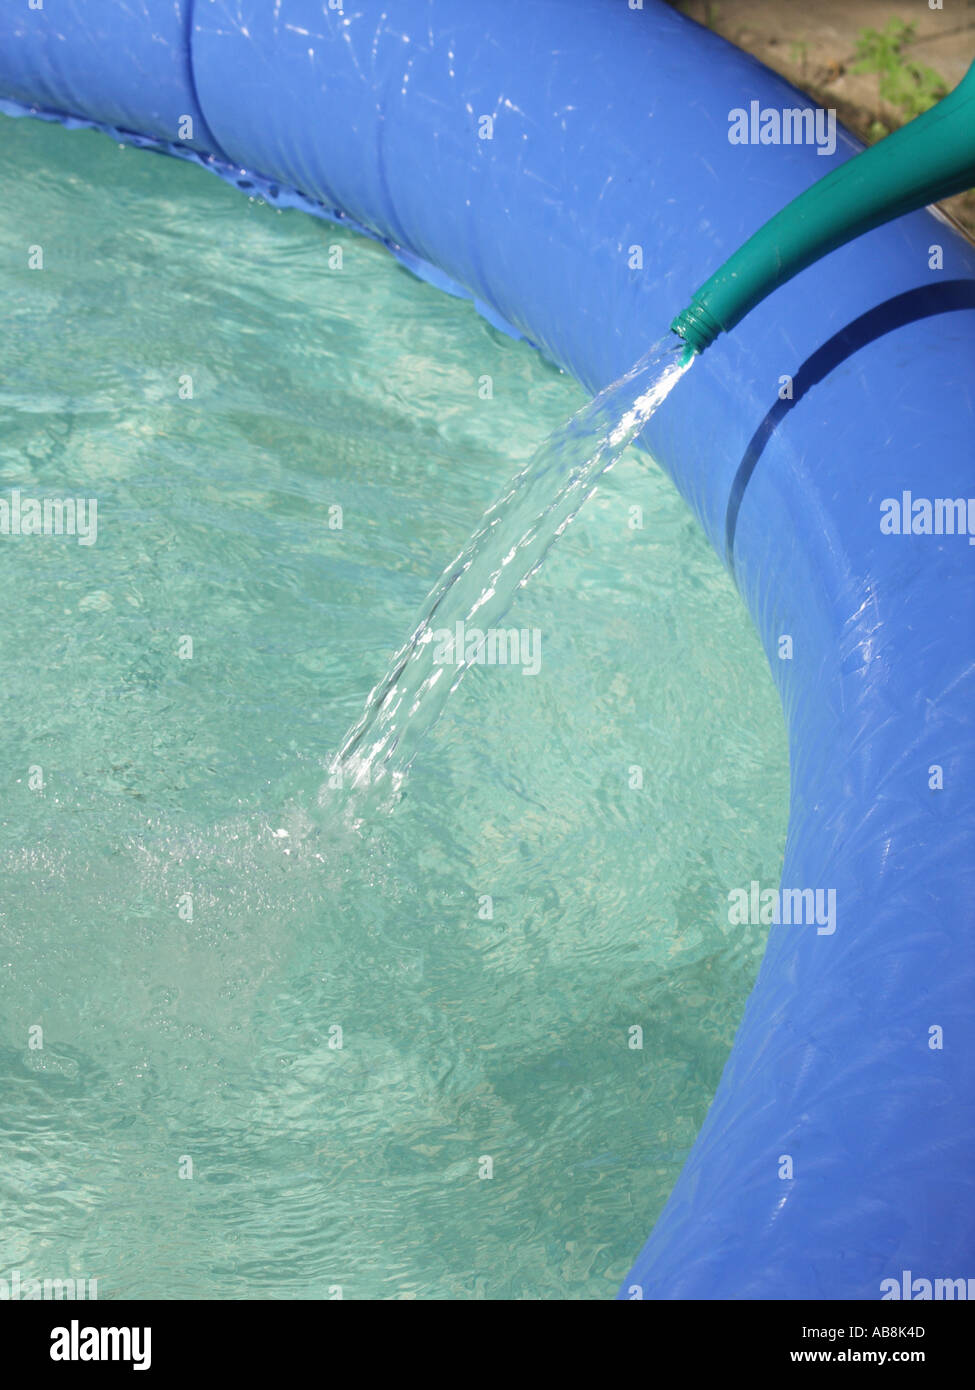 Filling Blowup Pool Stock Photo